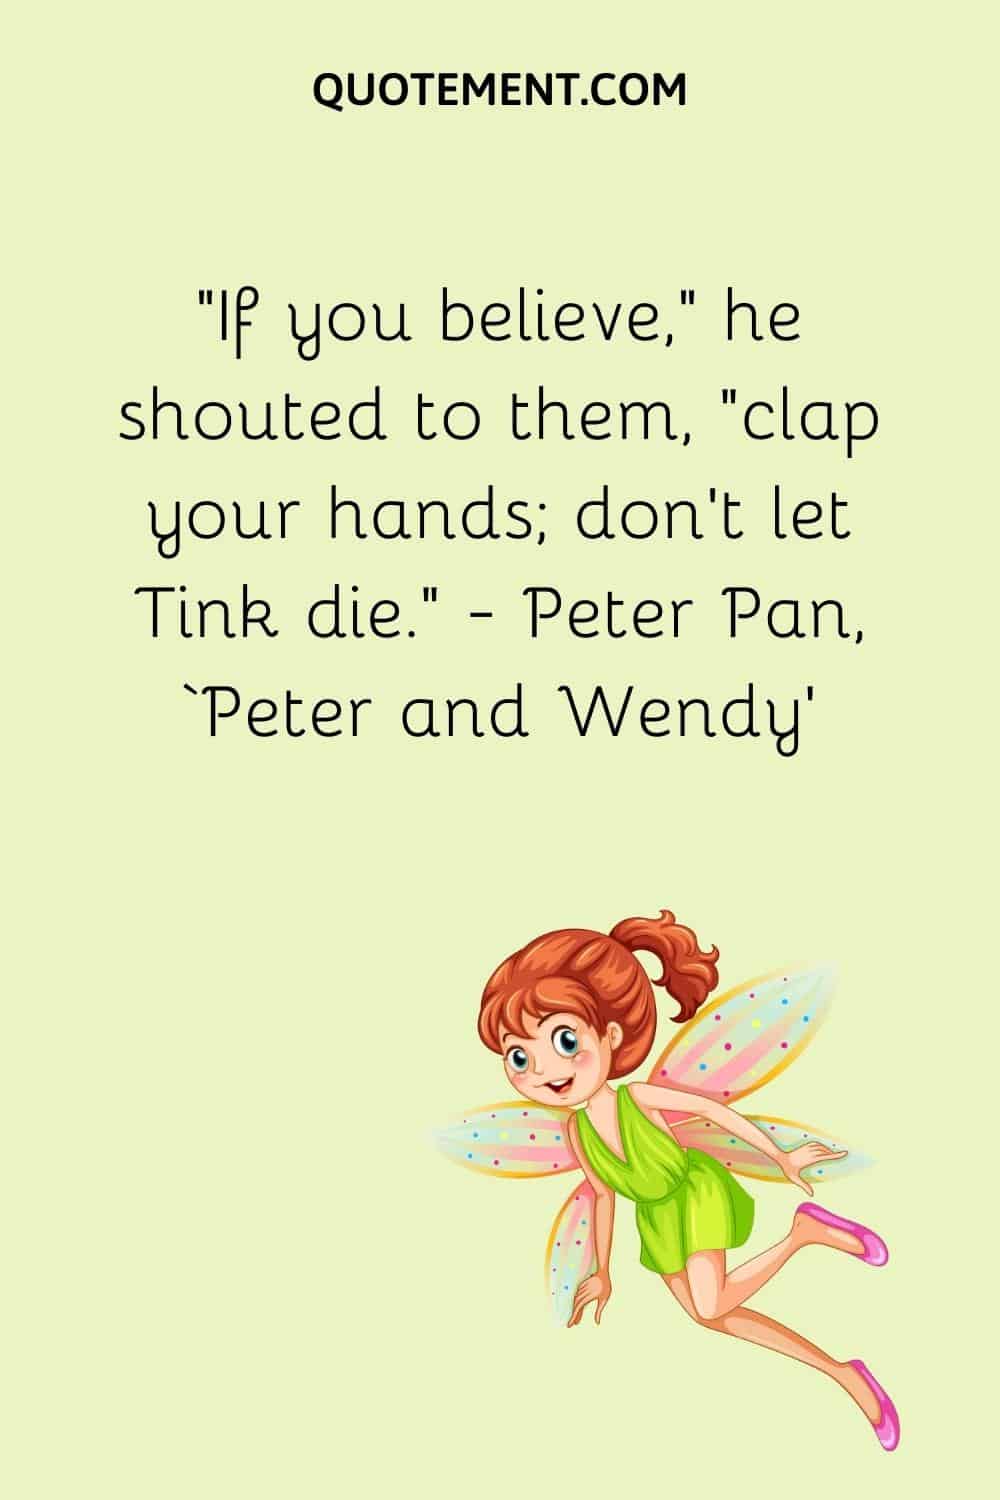 clap your hands; don't let Tink die